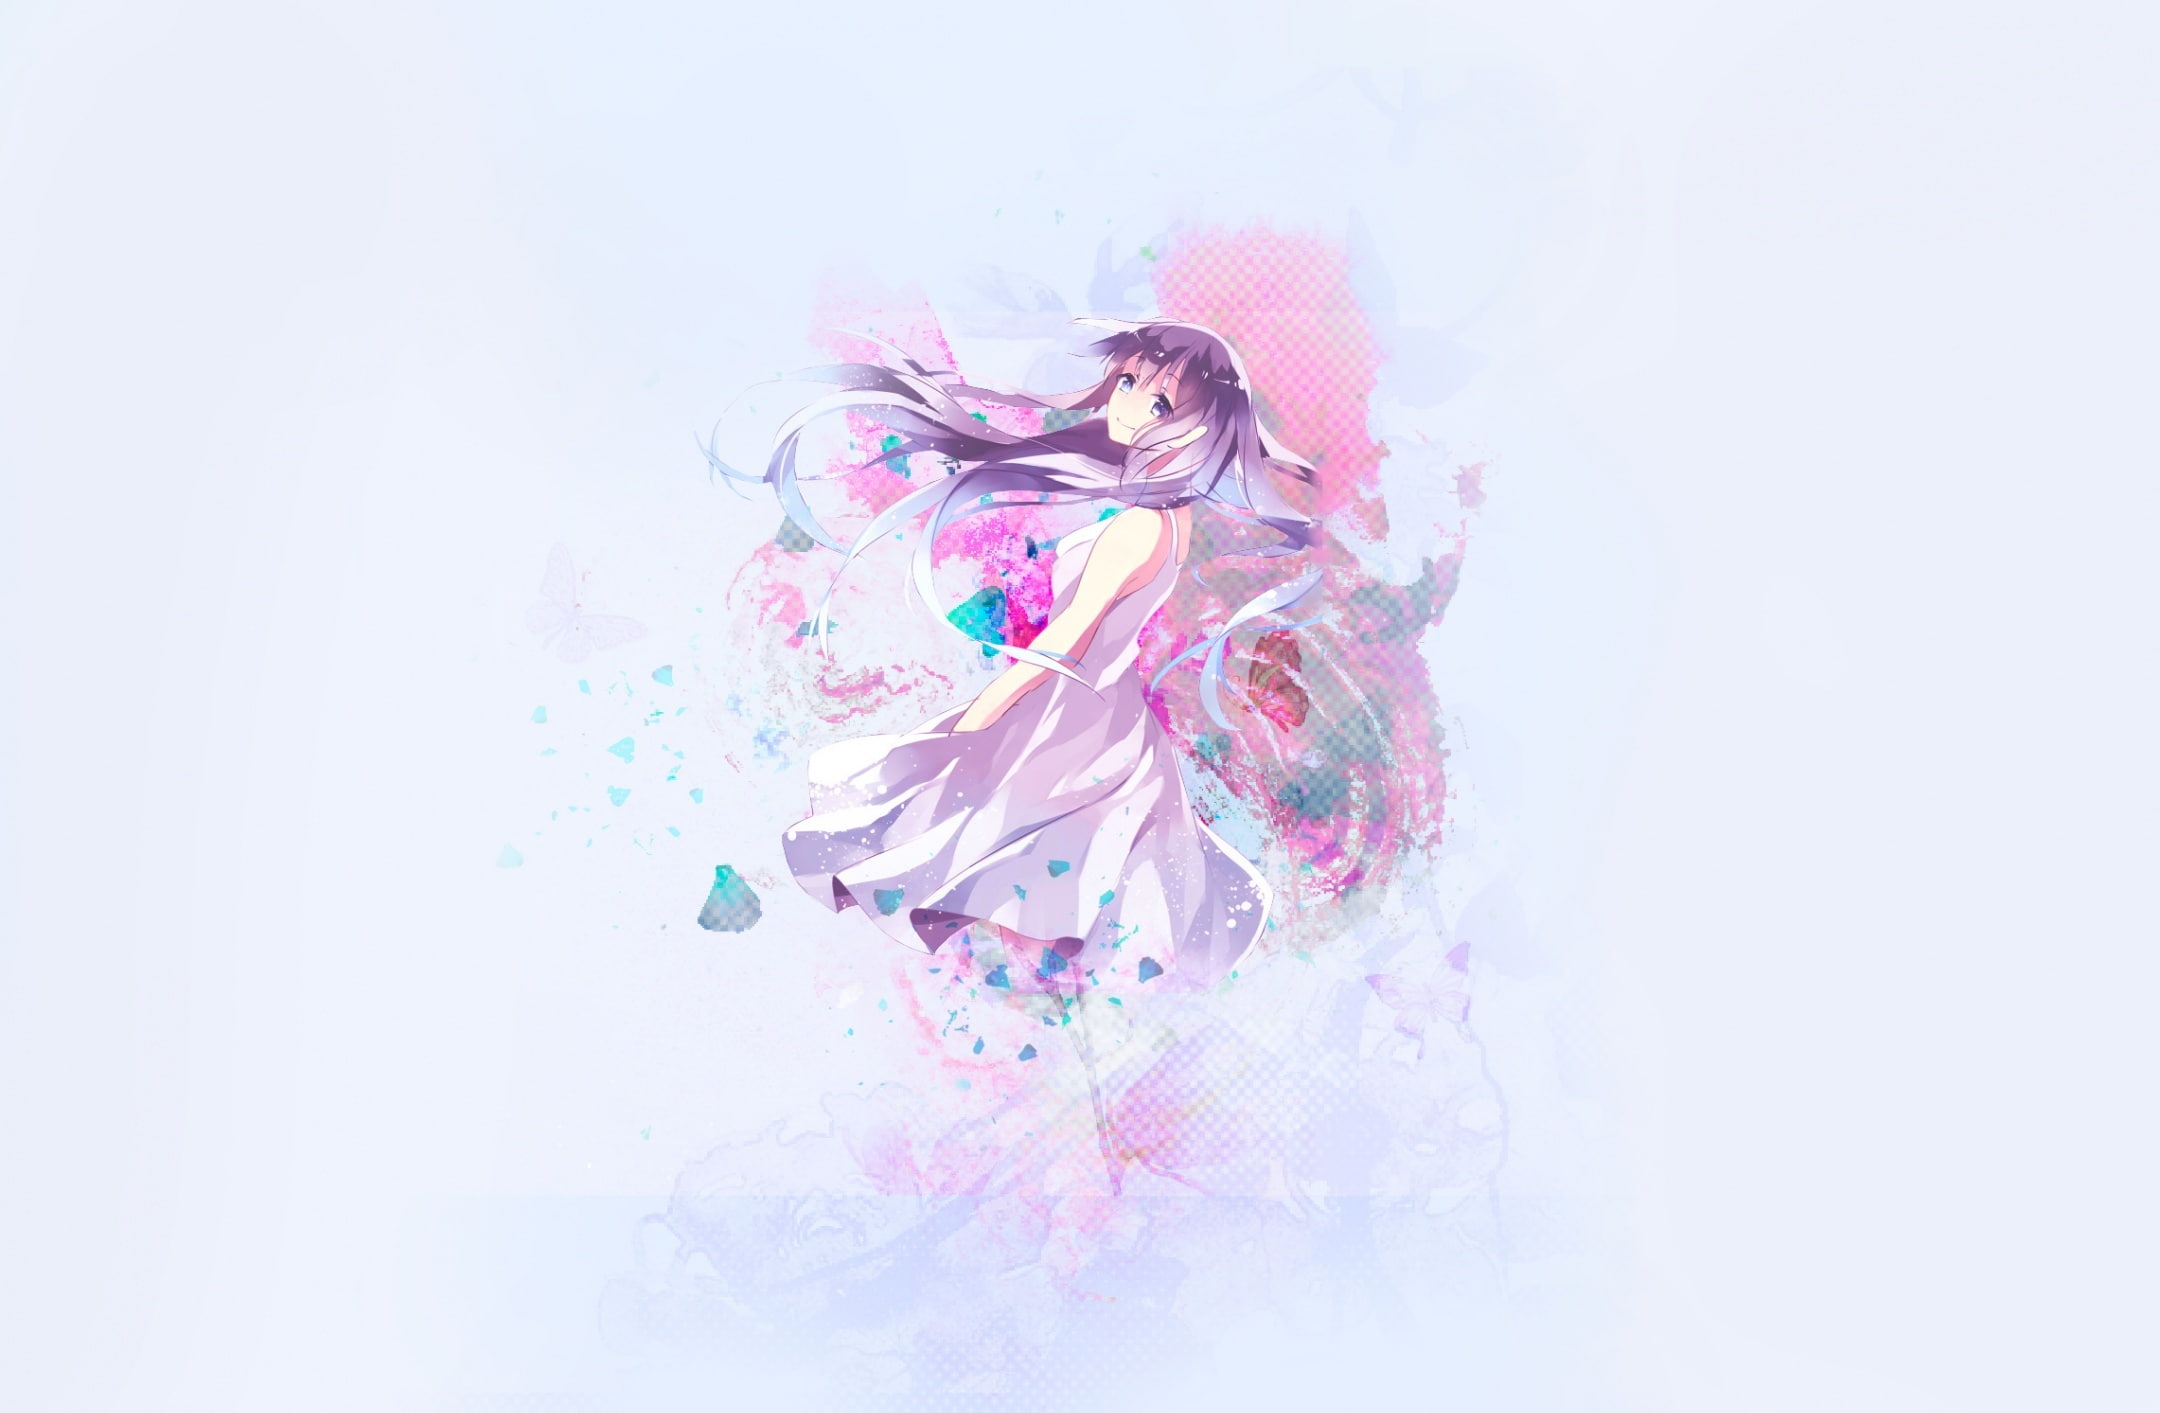 Pastel Anime, woman in pink dress wallpaper, Artistic, colorful